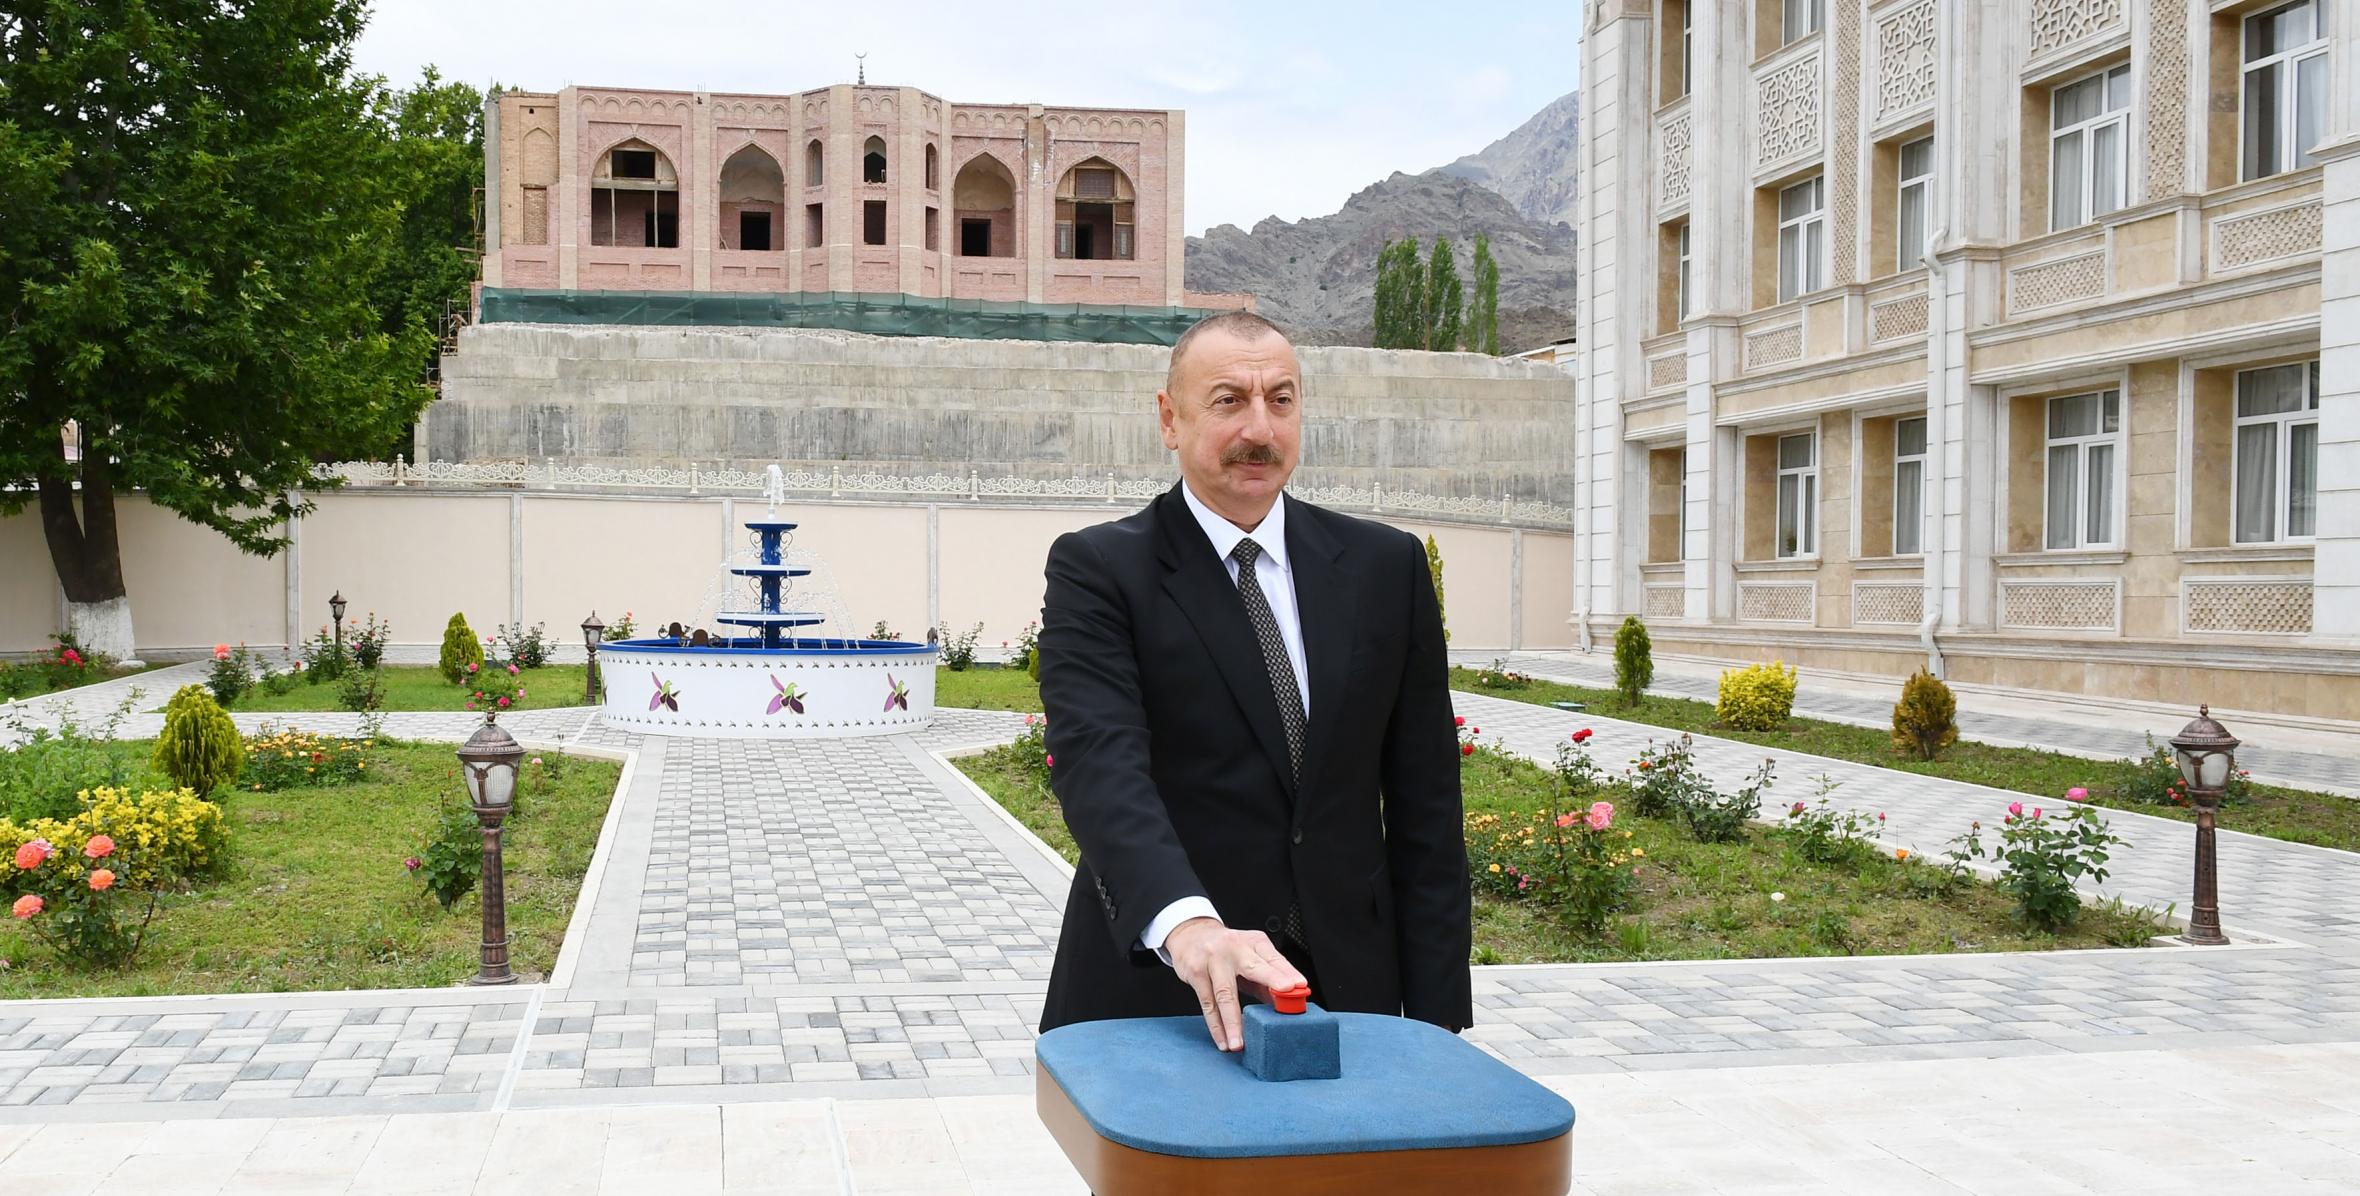 Ilham Aliyev has attended the launch of “Reconstruction of drinking water supply and sewerage systems in Ordubad district center and surrounding villages” project